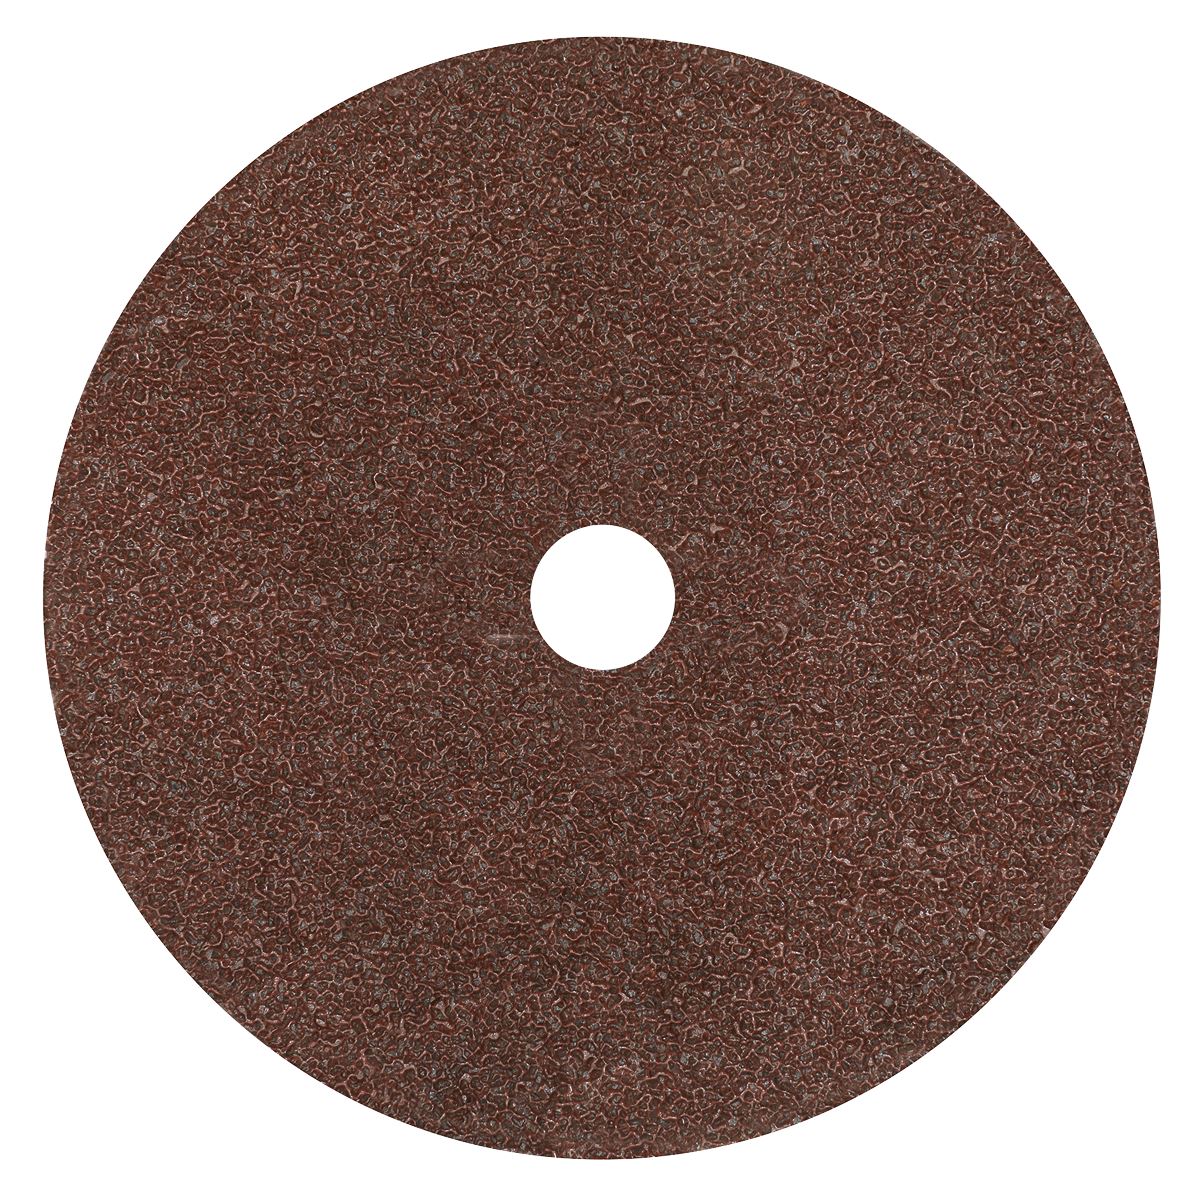 Worksafe by Sealey Fibre Backed Disc Ø175mm - 24Grit Pack of 25